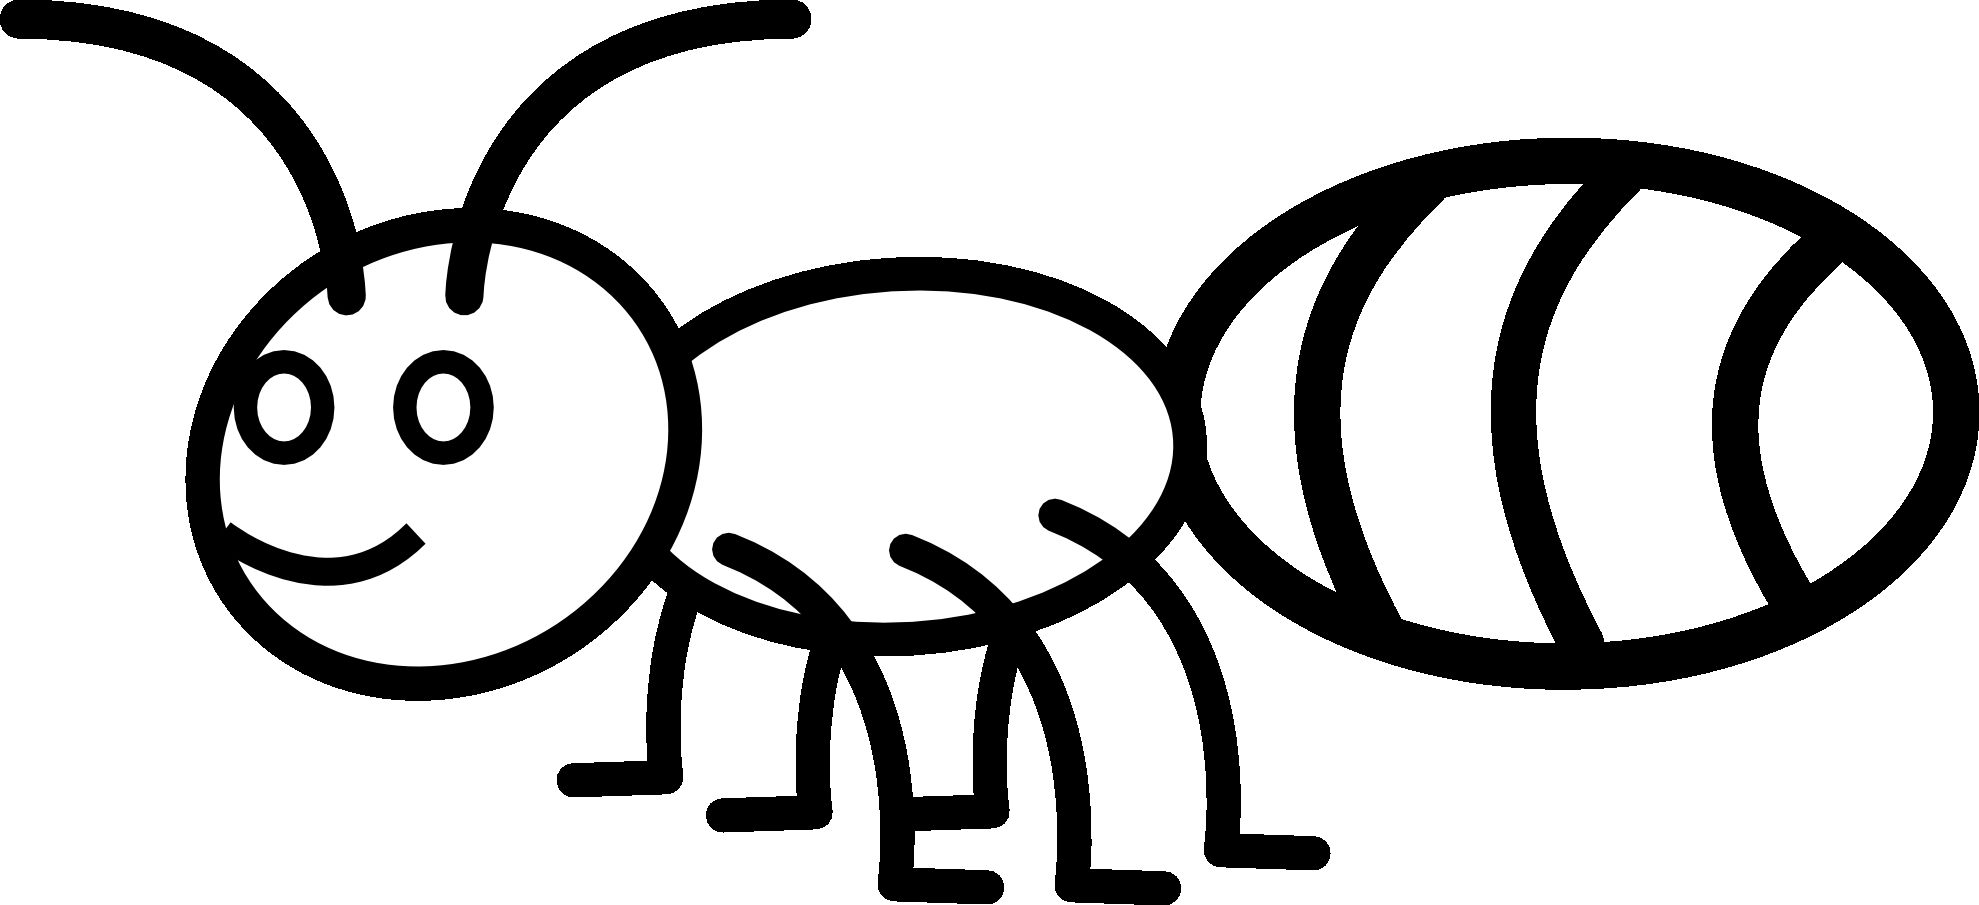 New ant coloring page. Ants clipart name